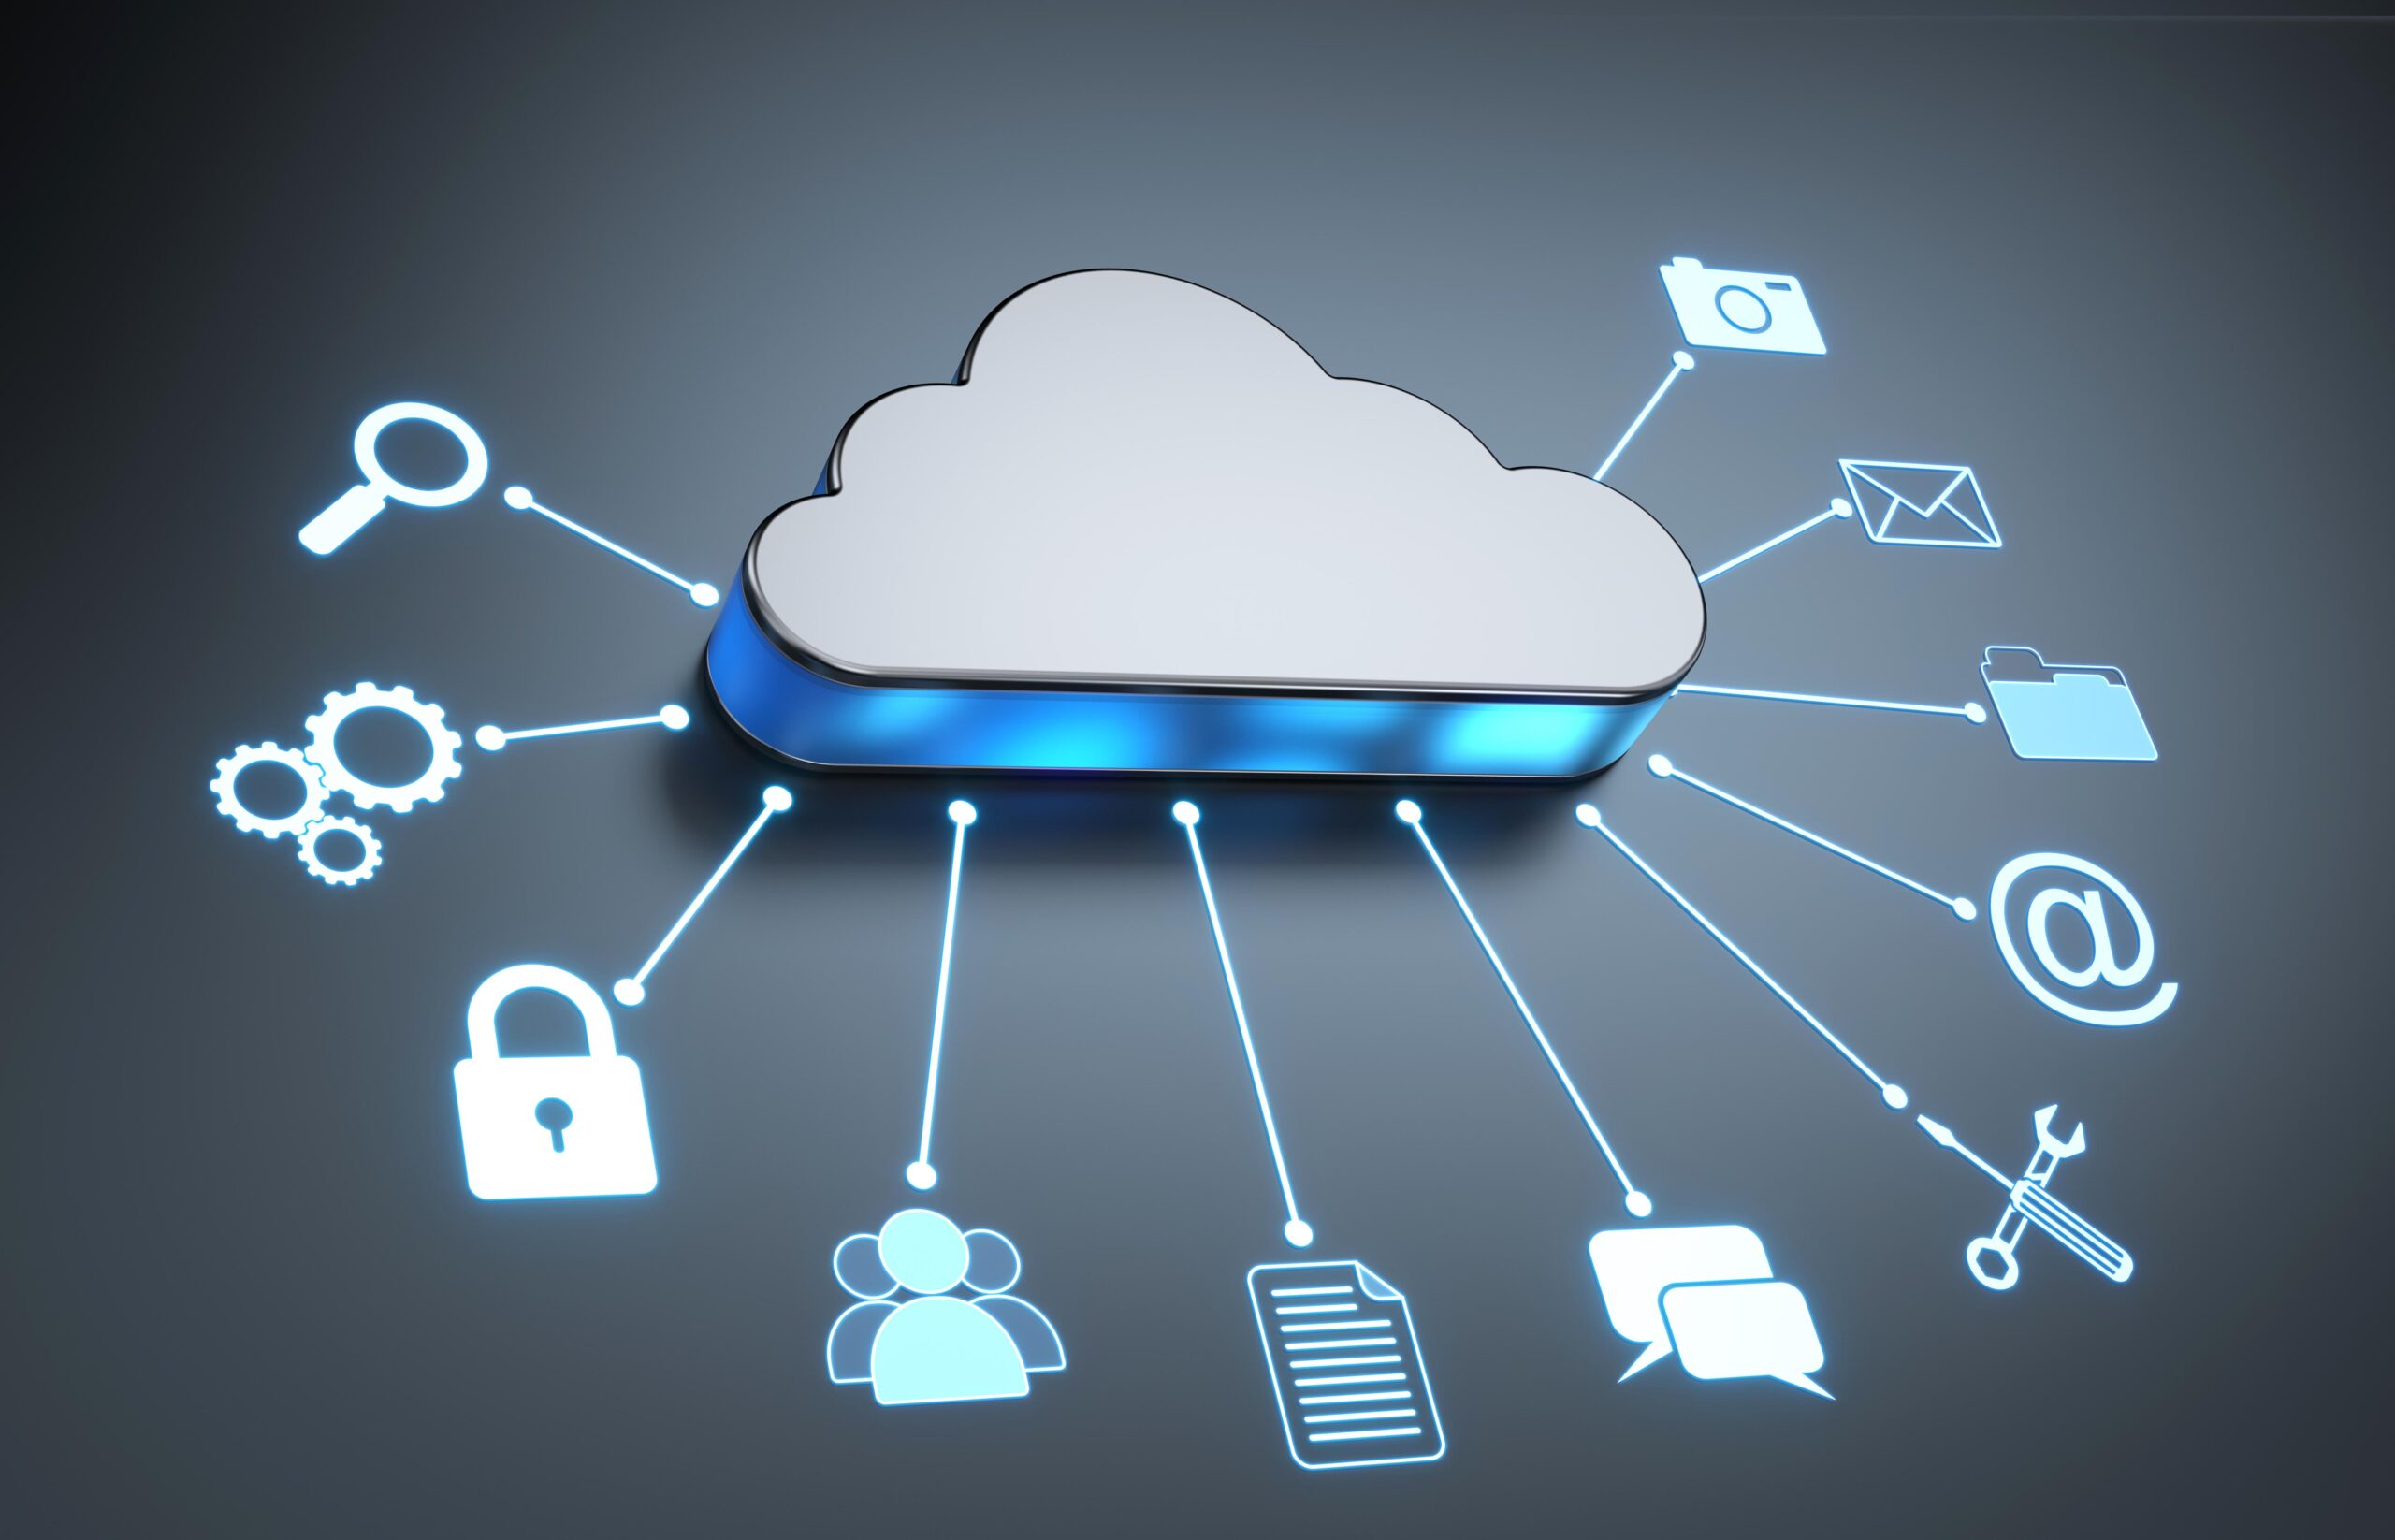 A 3D illustration of a silver cloud with a blue glow at the base with several icons such as a magnifying glass, camera, envelope, folder, and others representing different types of cloud services.